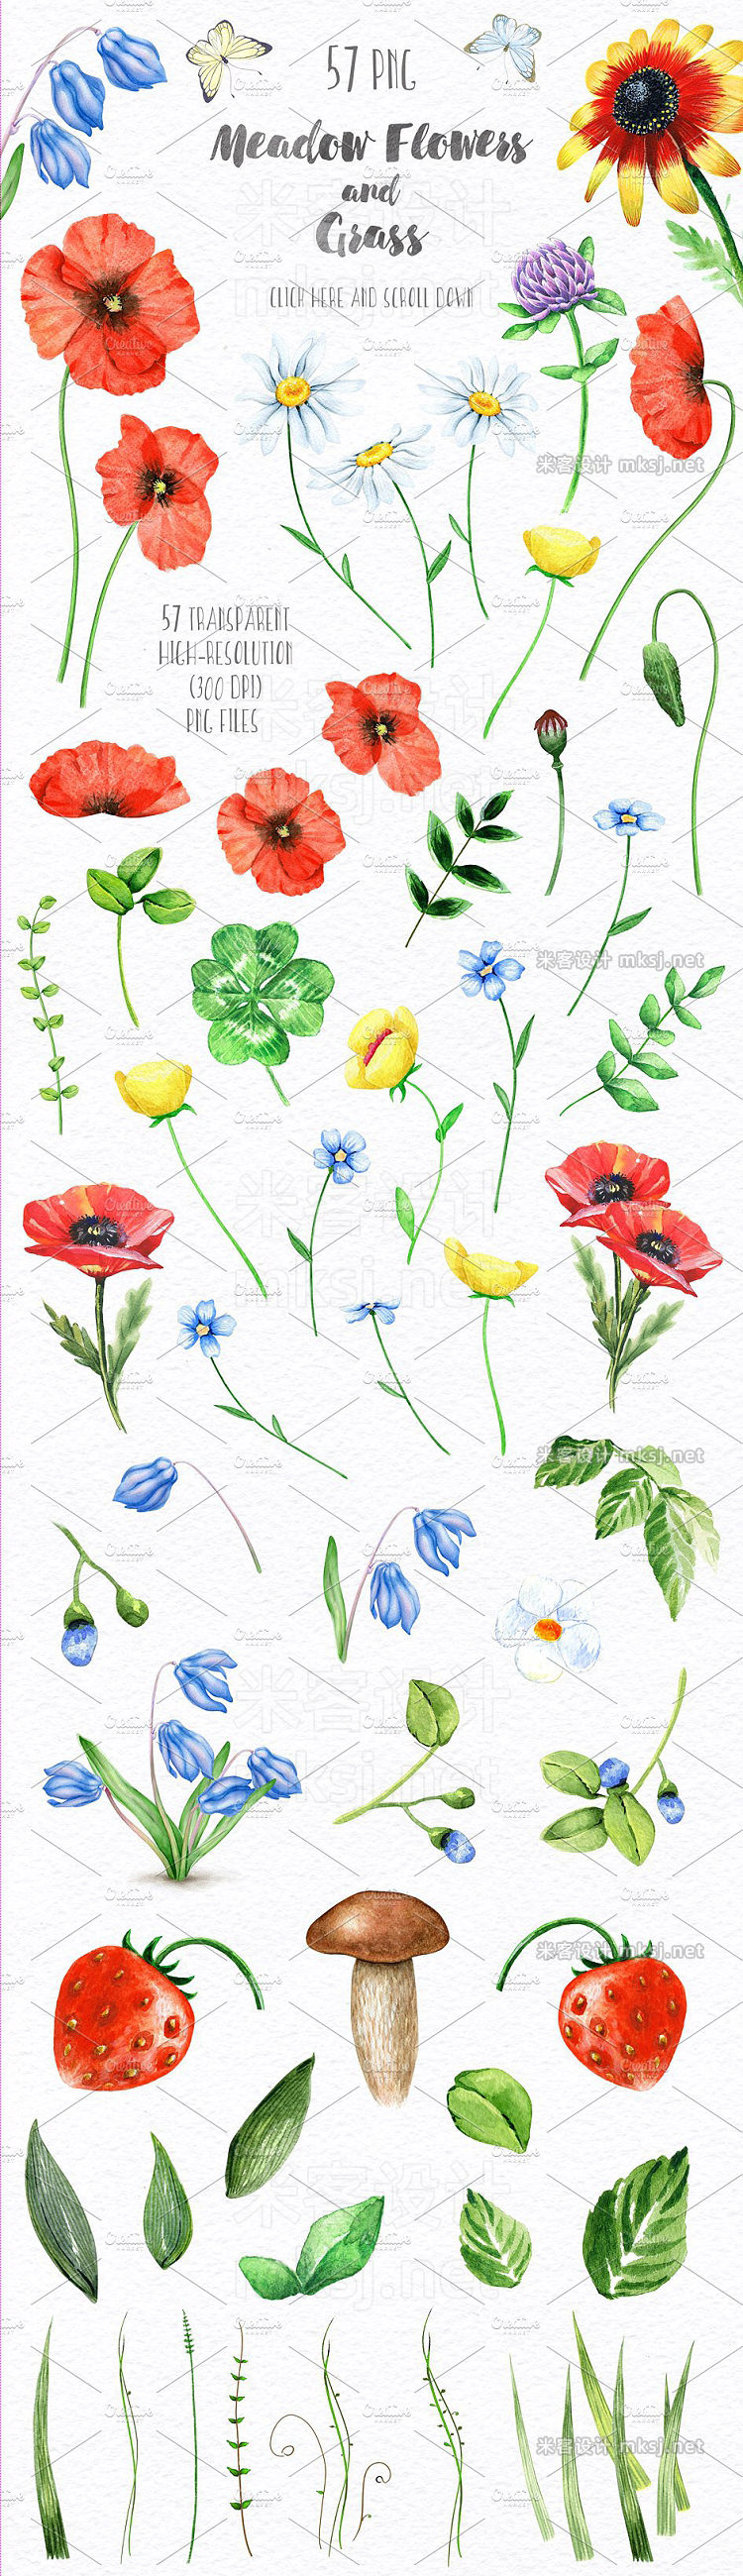 png素材 Floral set Over 115 PNG